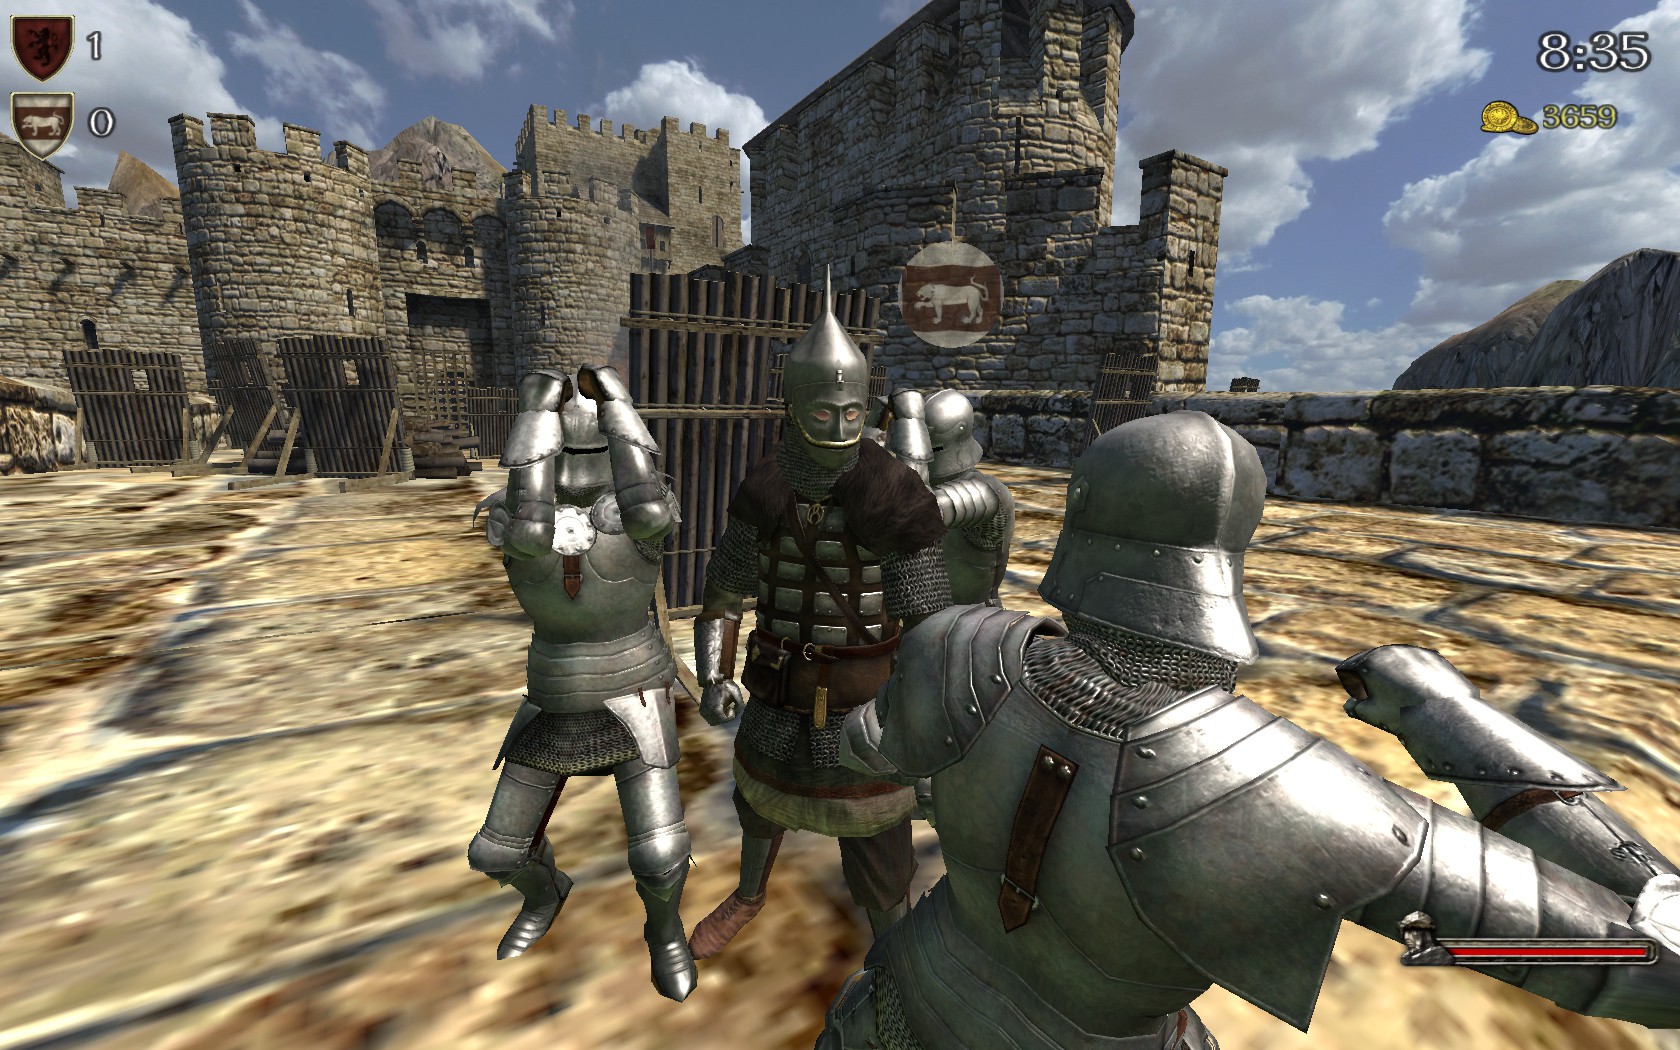 Multiplayer Armours Redone mod for Mount & Blade: Warband.